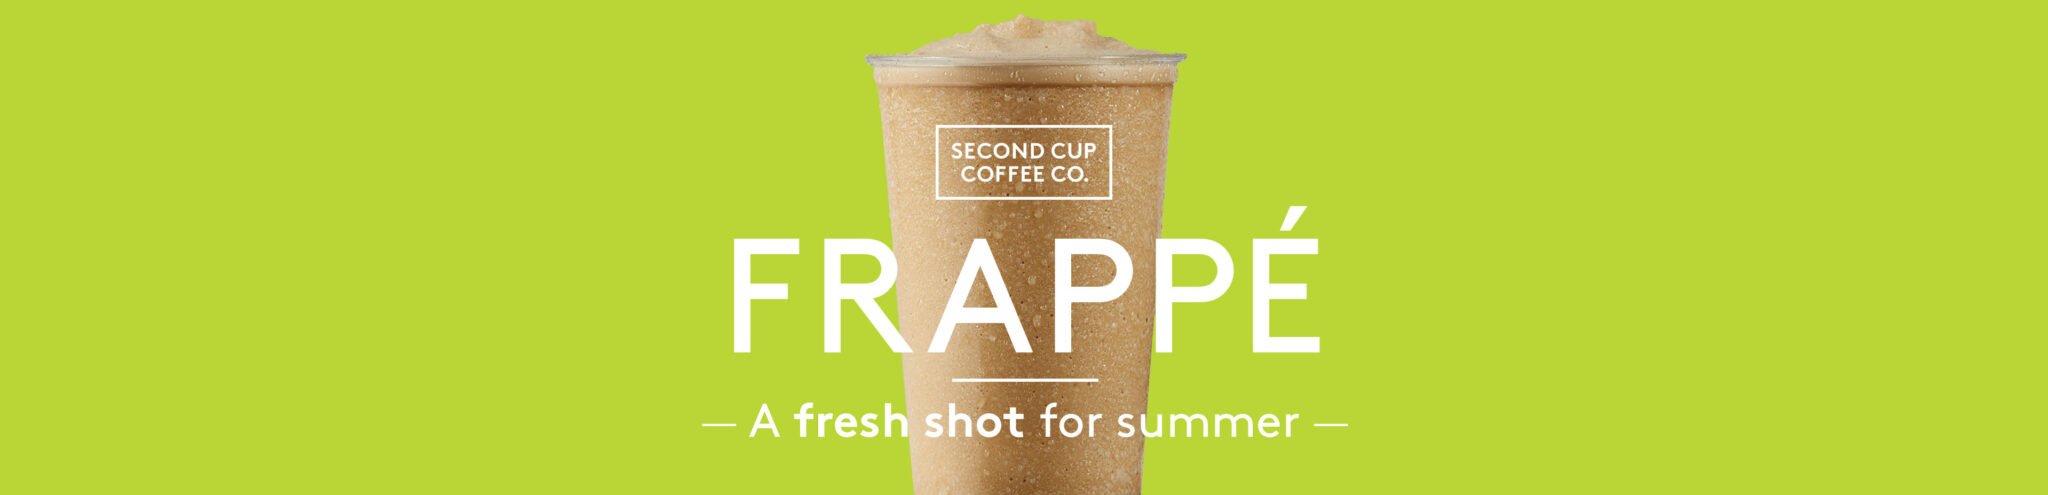 Celebrate the Frappe & Enter to WIN a $140 Prize Pack! #giveaway